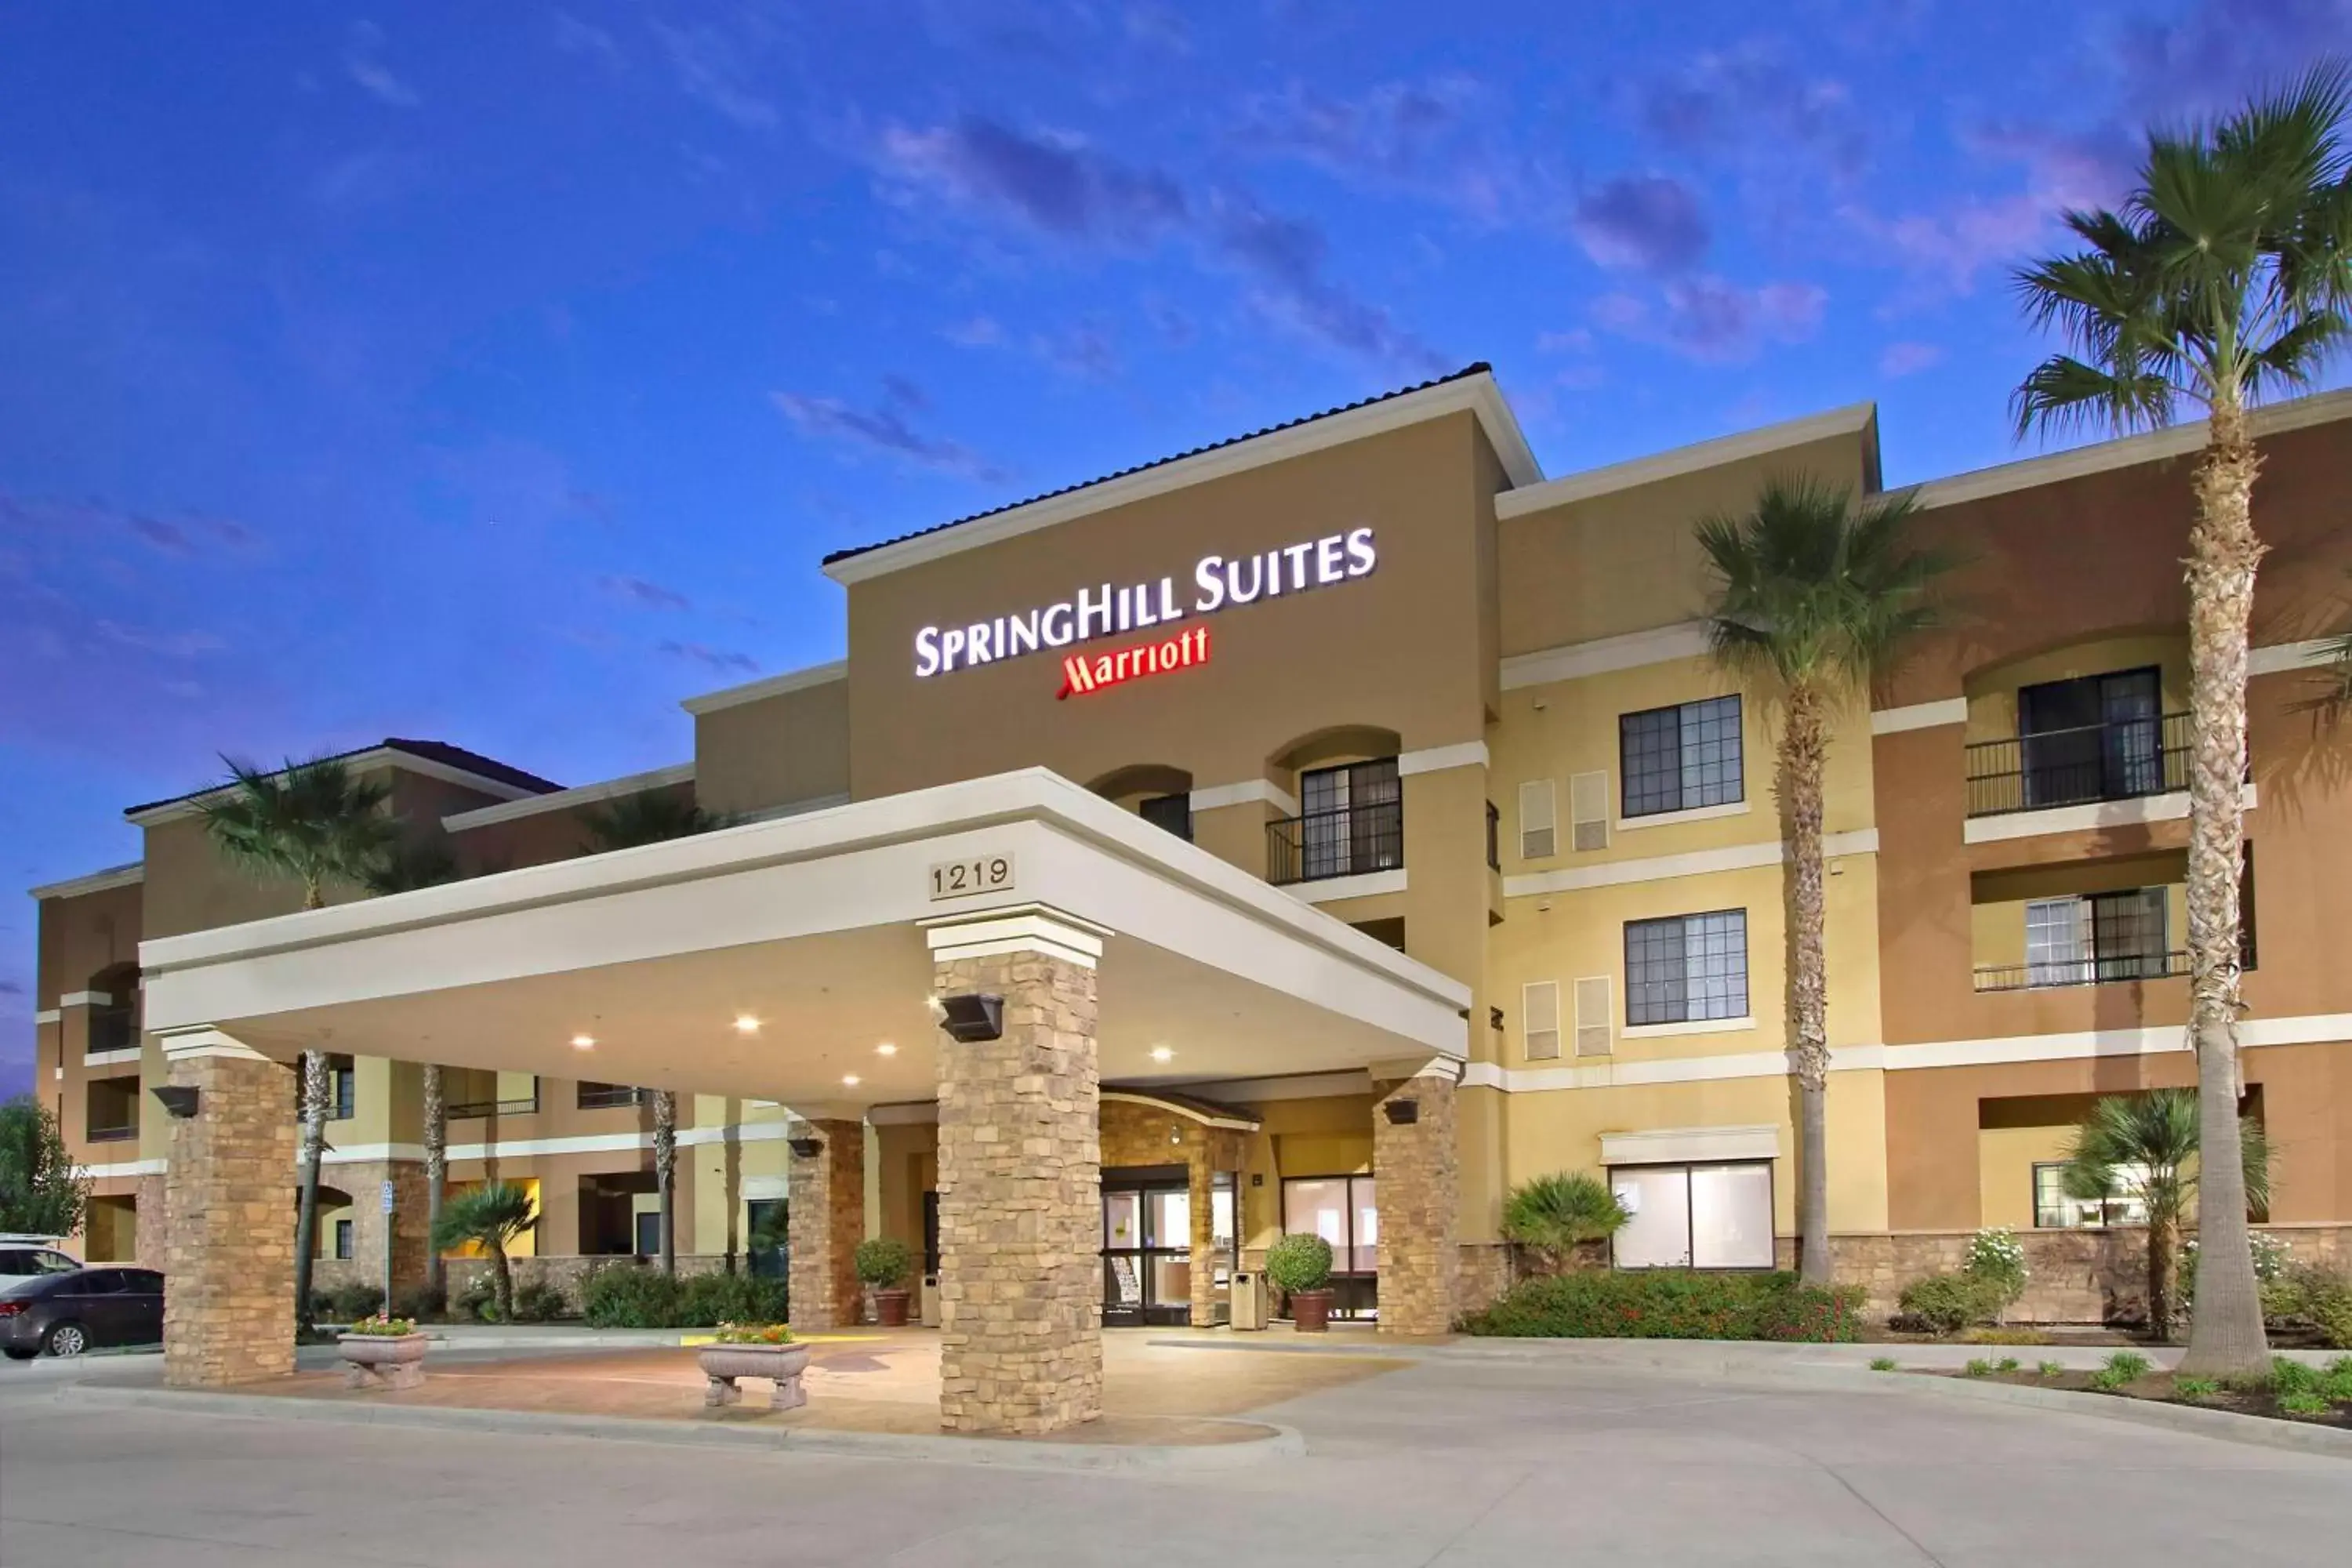 Property Building in SpringHill Suites by Marriott Madera